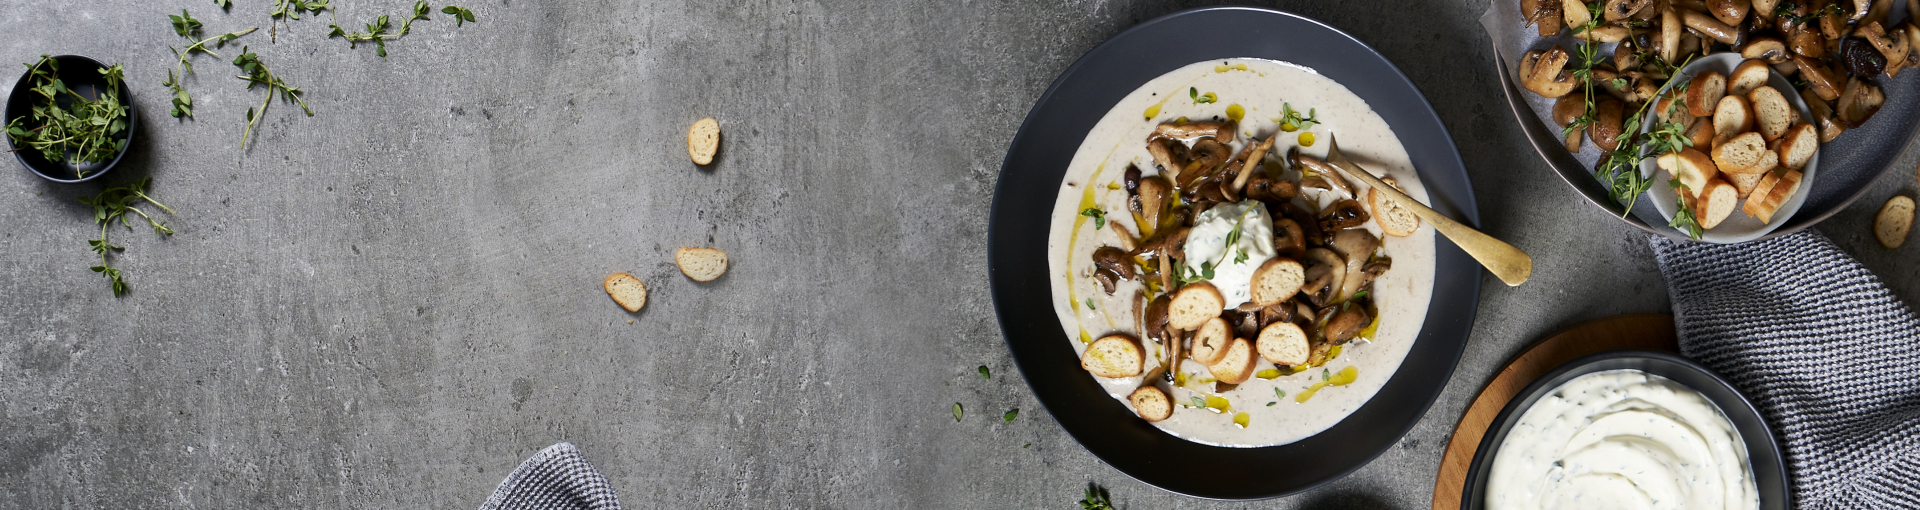 Rich & Creamy Mushroom Soup with Croutons and Fresh Herbs